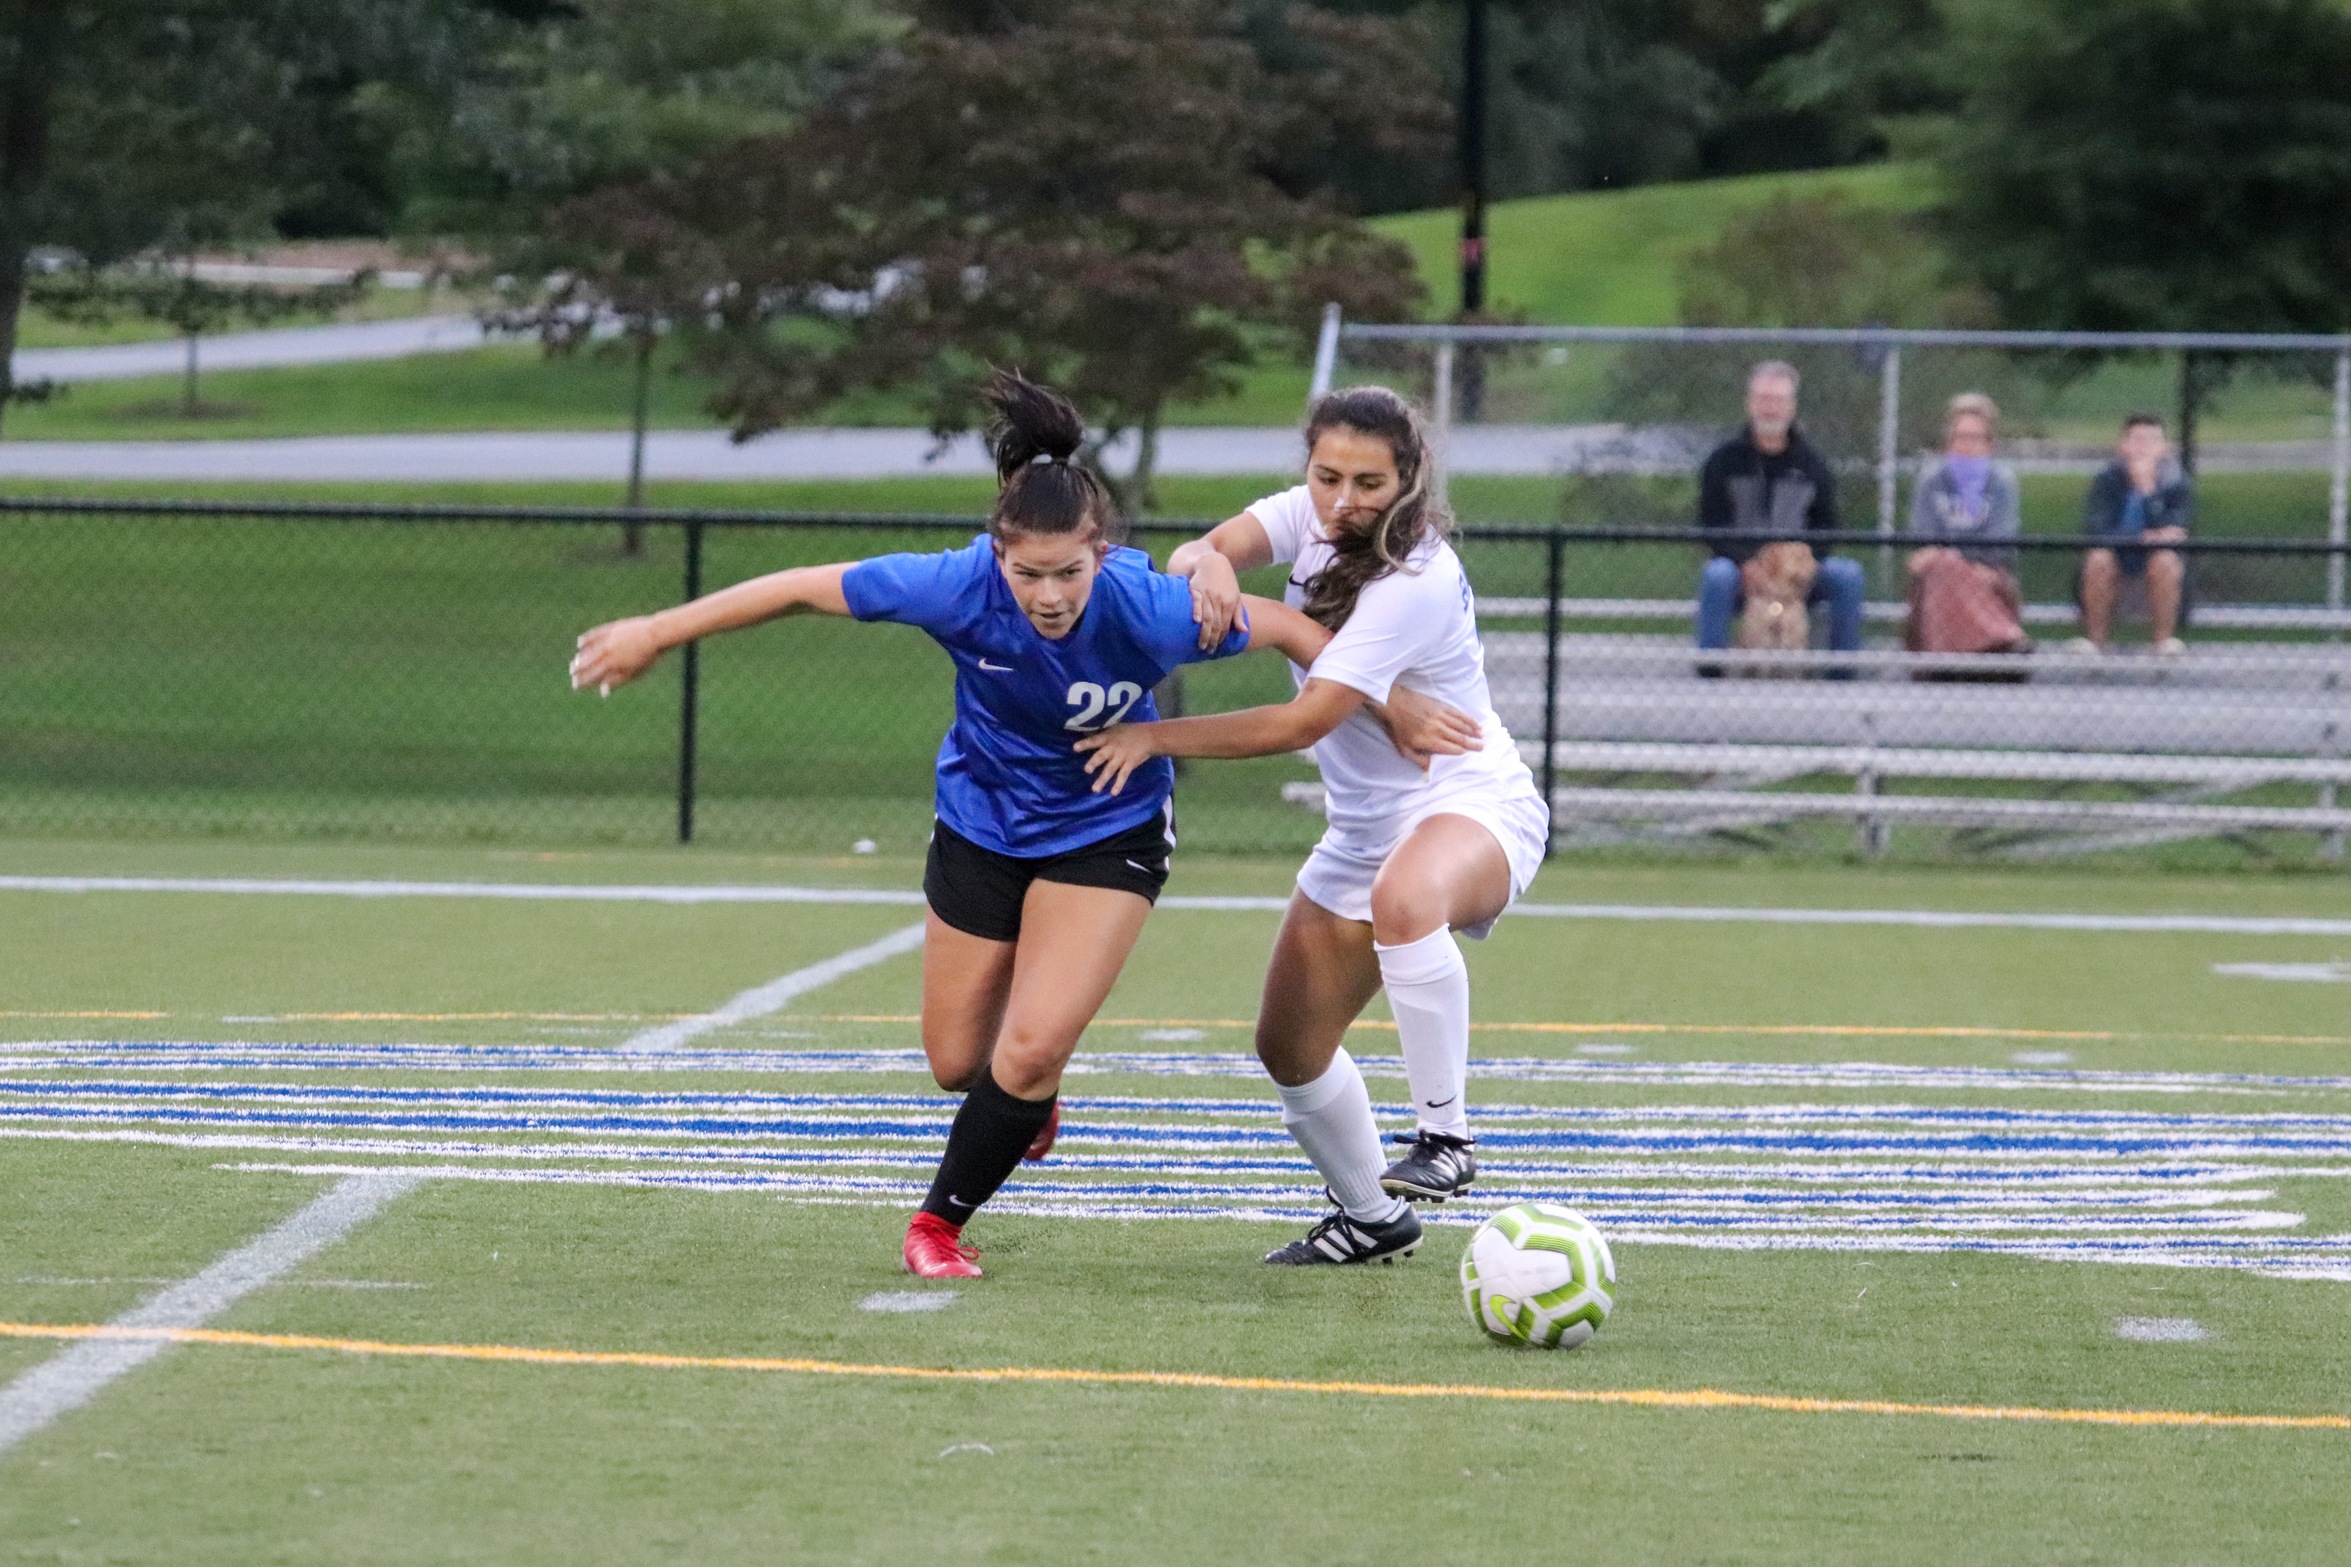 Taylor Richardson (left) in action during the Fall portion of BC's 2020-21 campaign (Photo courtesy of Victoria Brayman '22).